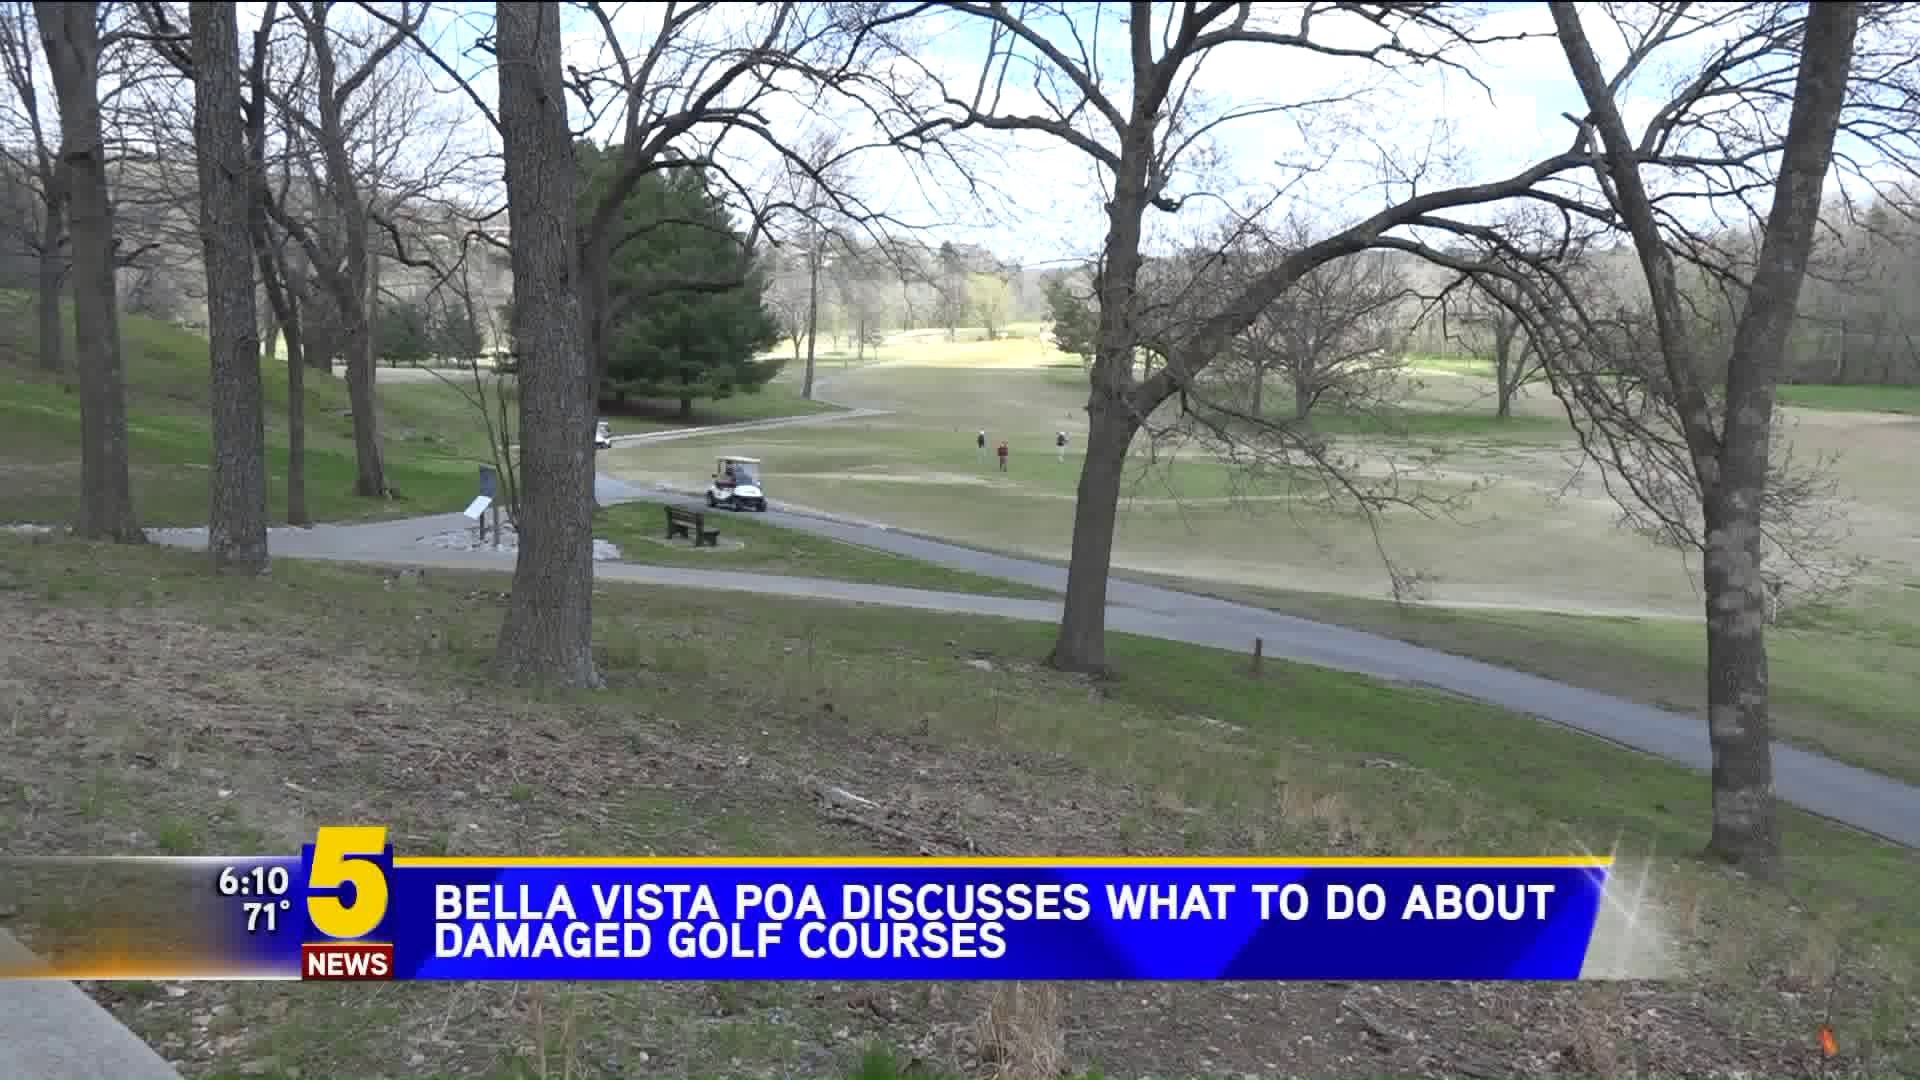 Bella Vista POA Discusses What To Do About Damaged Golf Courses